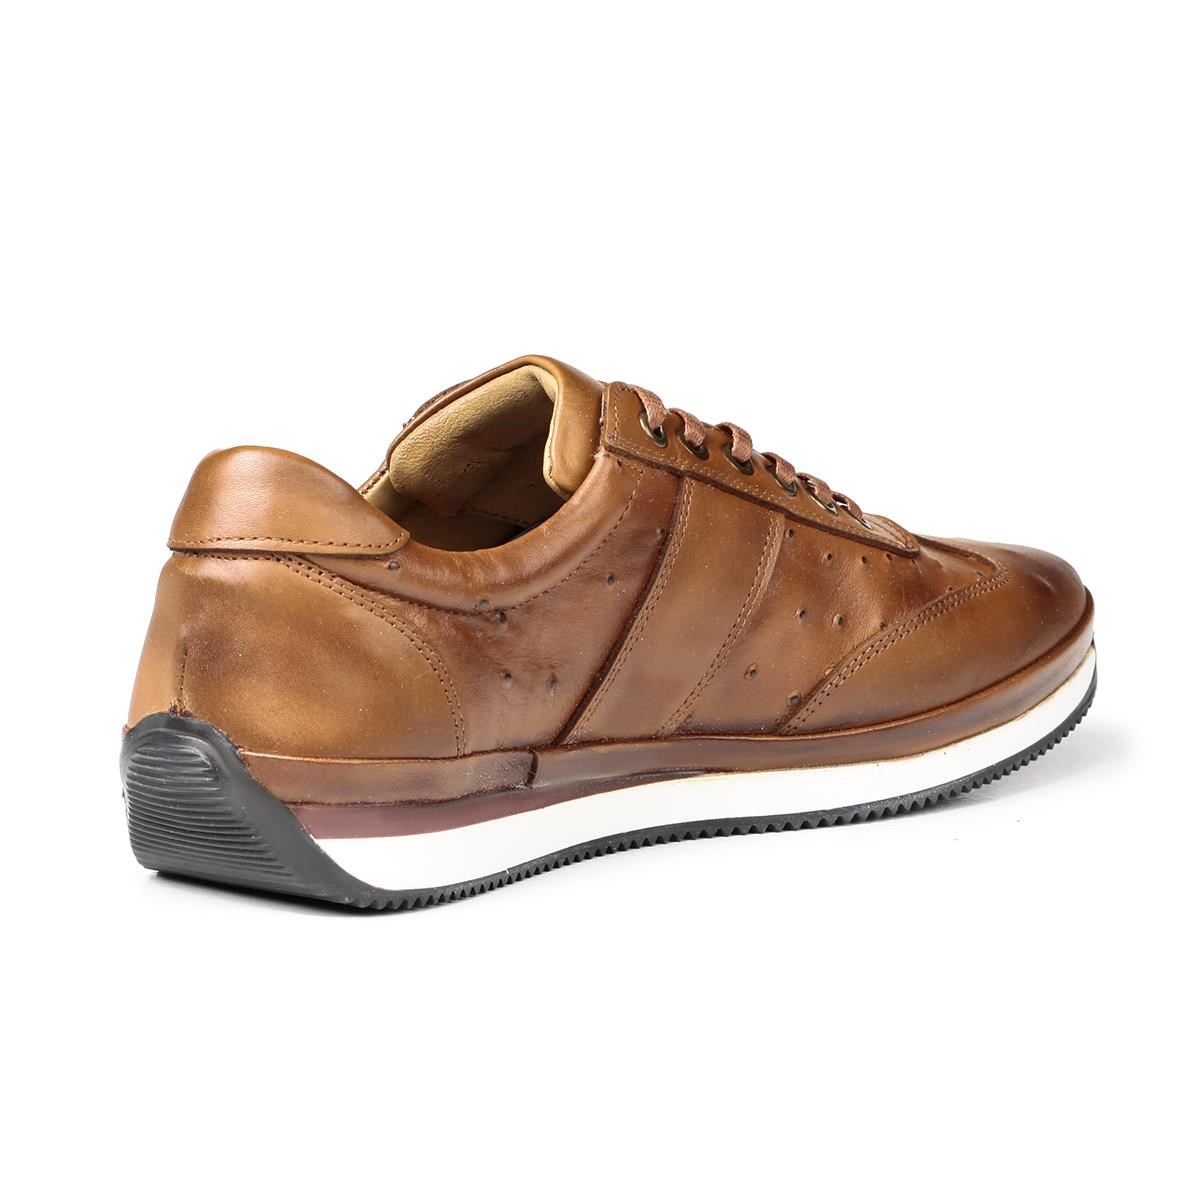 Ducavelli Ostrich 2 Genuine Leather Men's Casual Shoes